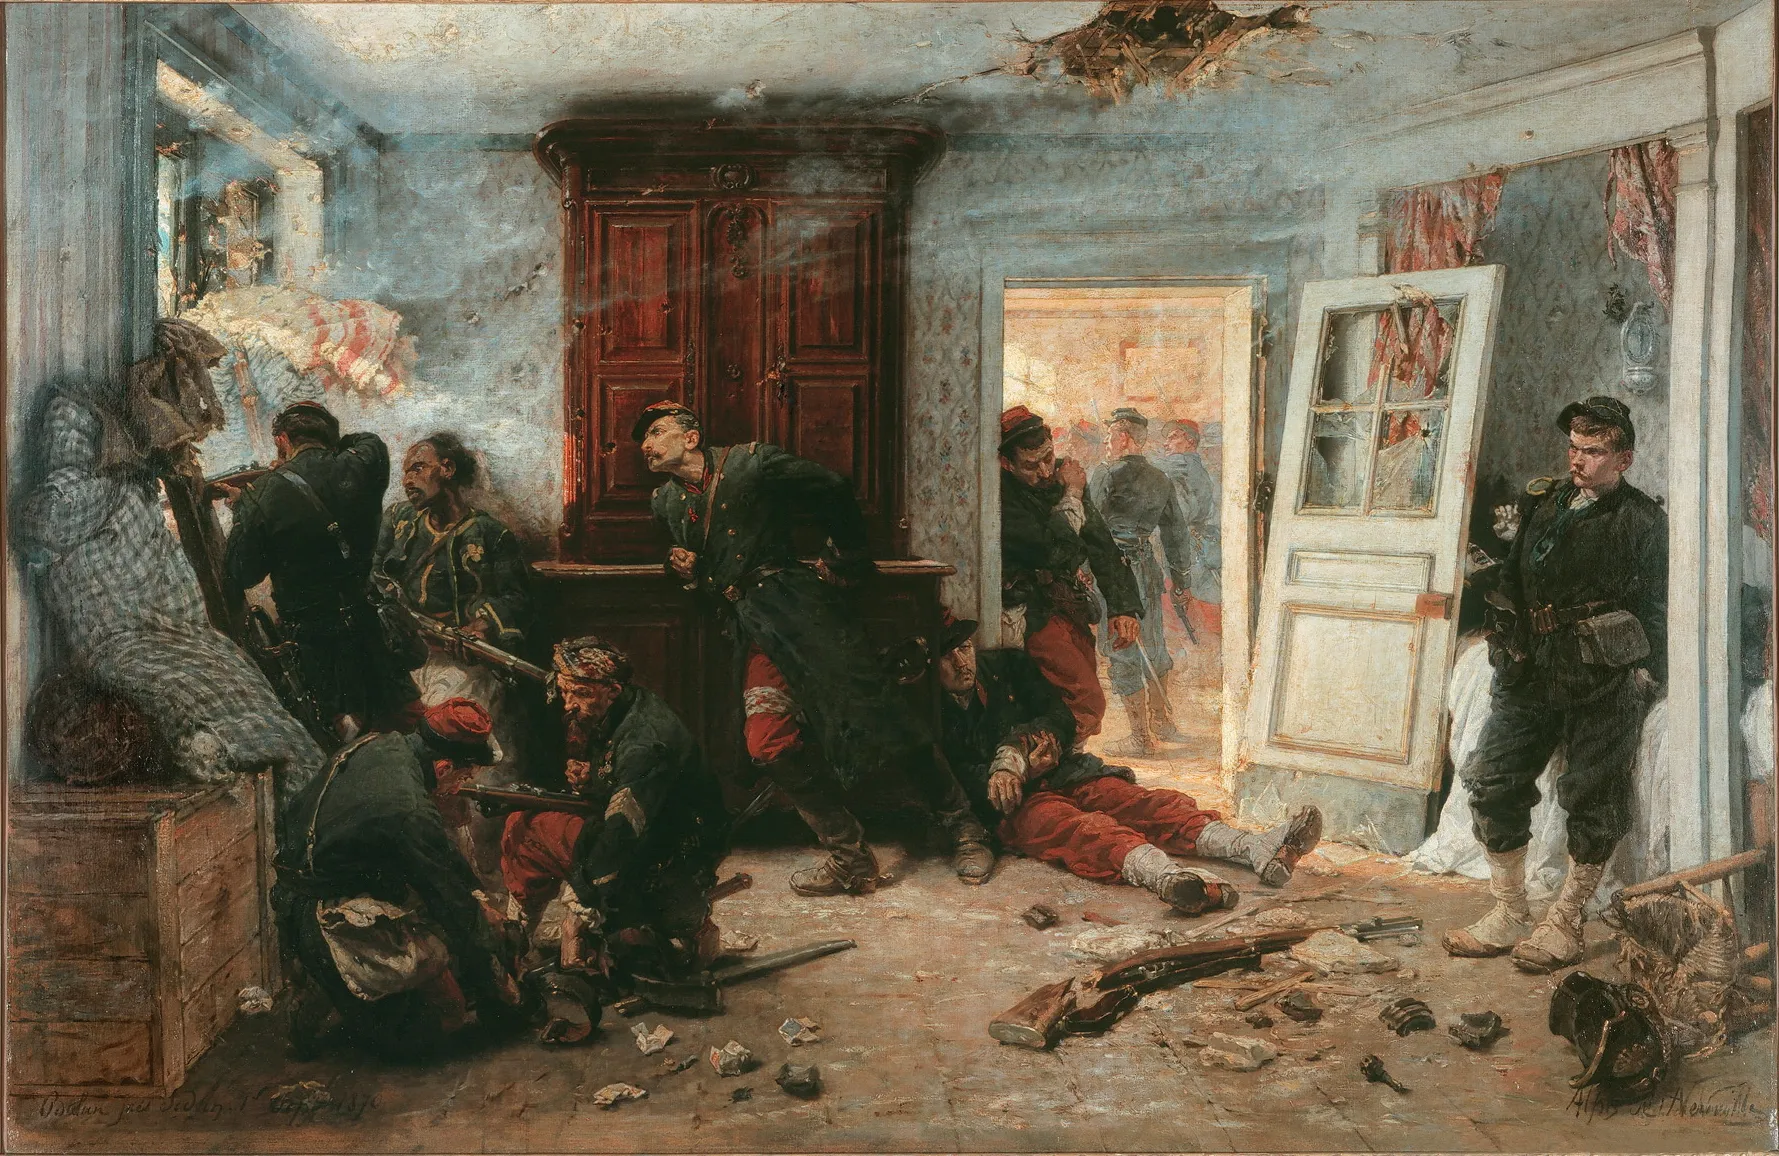 Photo showing: Painting by Alphonse-Marie-Adolphe de Neuville, 1873: Les dernières cartouches (The last cartridges). French snipers ambush Bavarian troops, hiding in the l'Auberge Bourgerie in Bazeilles, prior to the Battle of Sedan during the Franco-Prussian War in 1870.